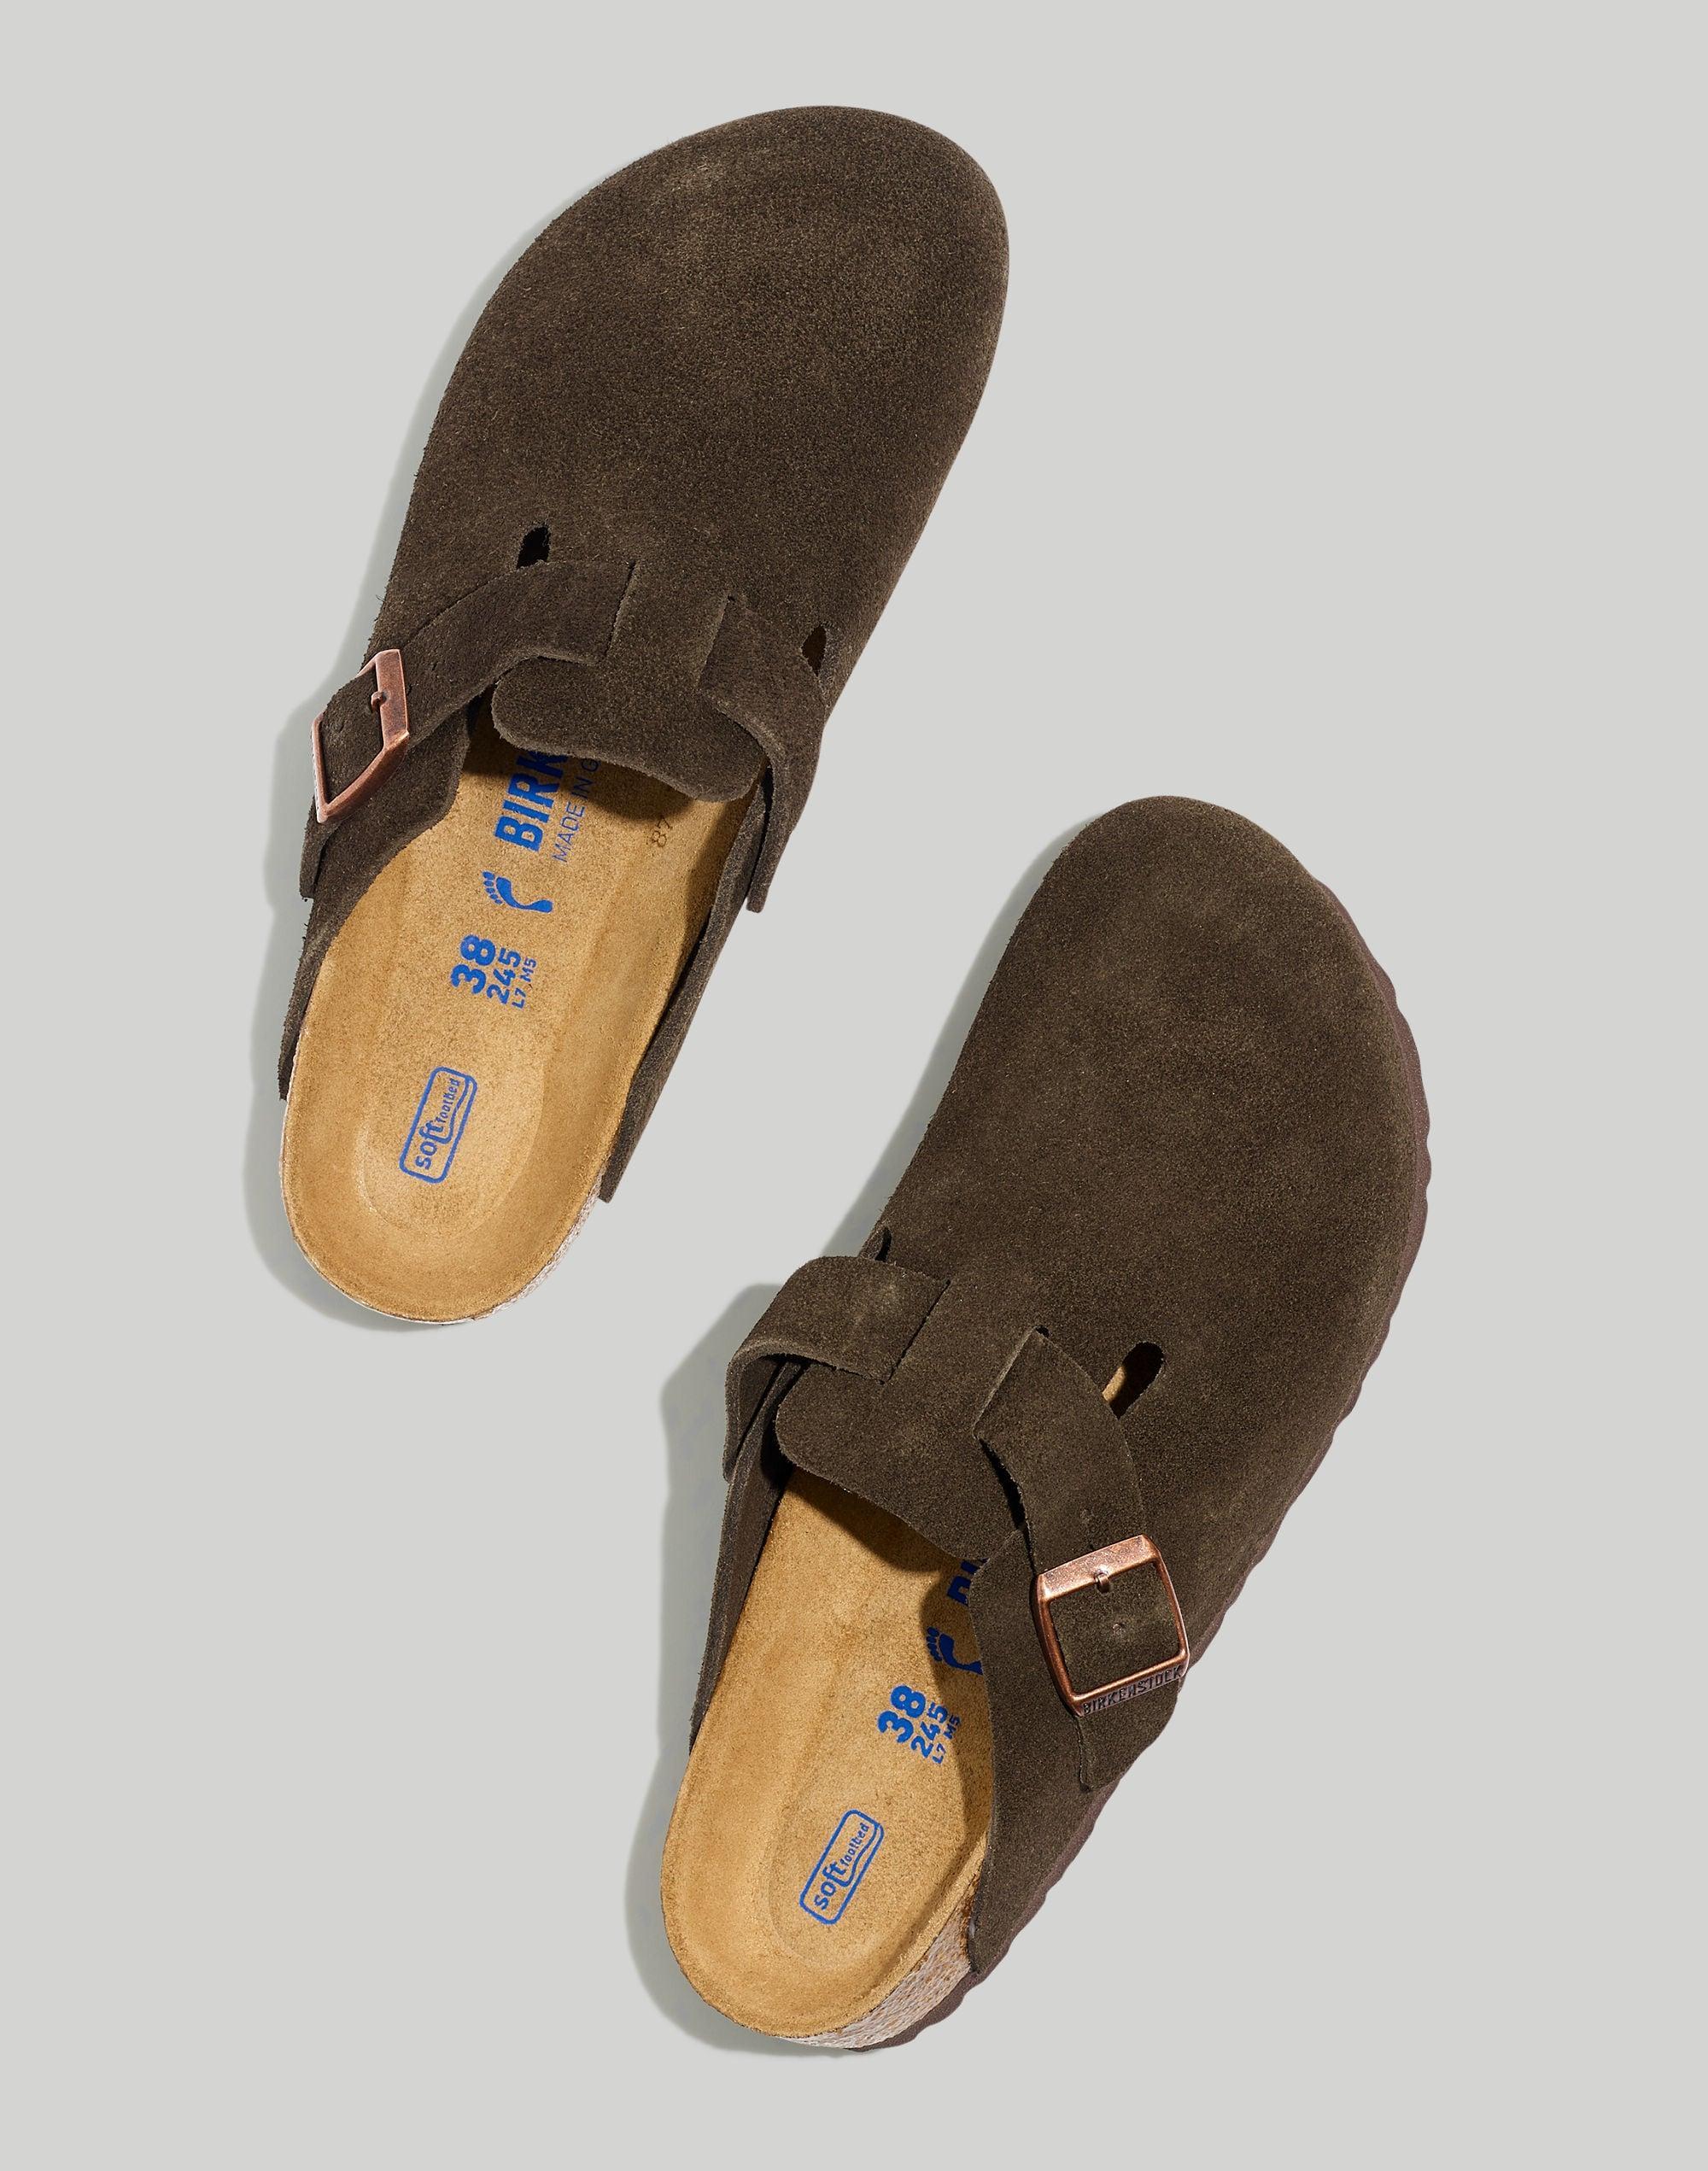 Birkenstock® Boston Suede Soft Footbed Clogs Product Image